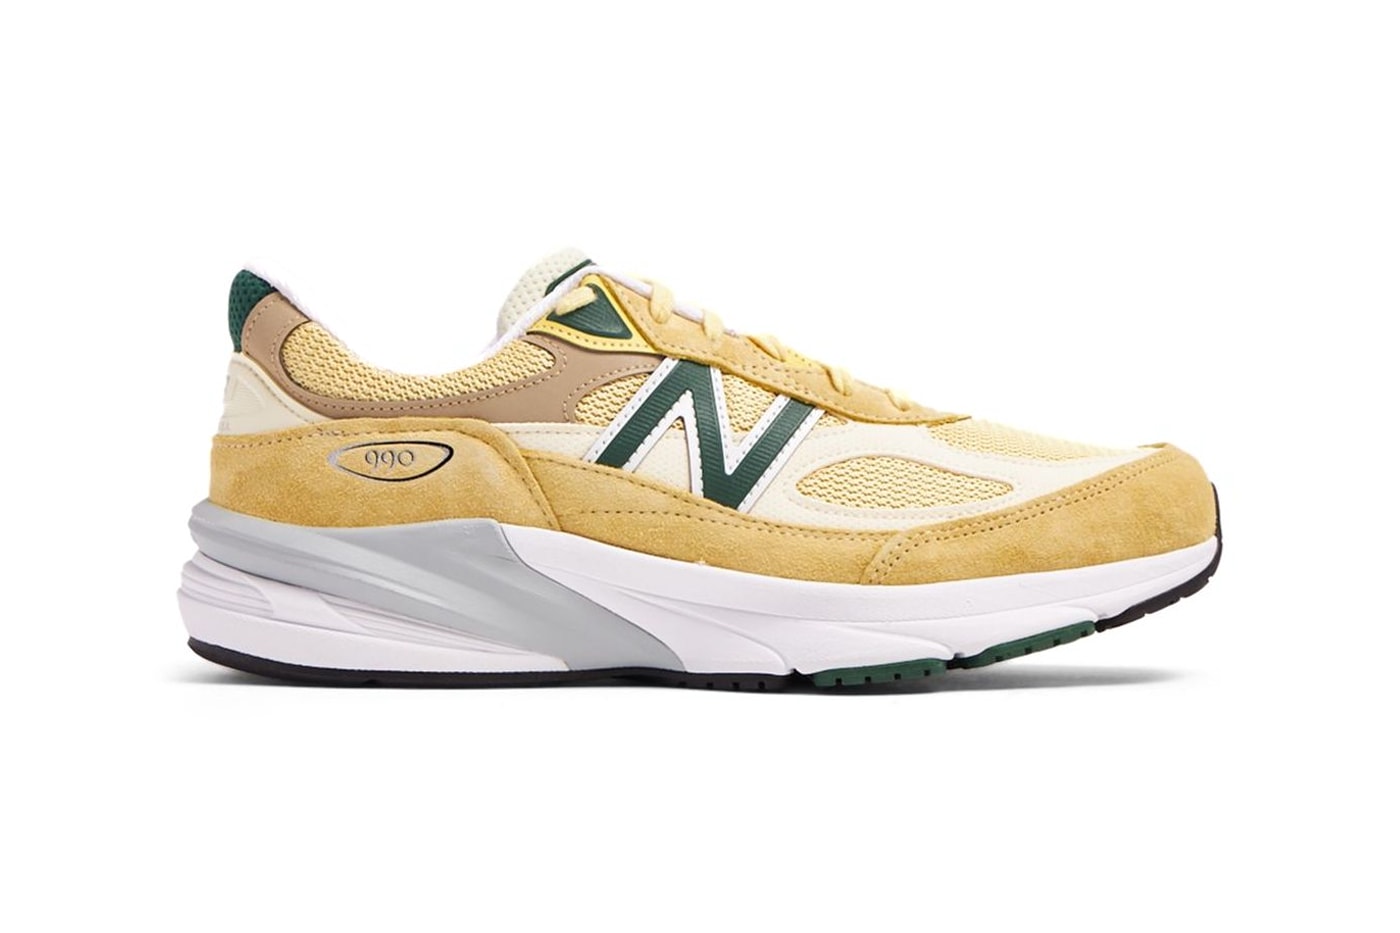 New Balance 990V6 Made in USA Arrives in "Pale Yellow" U990TE6 Pale Yellow/Forest Green everyday sneaker